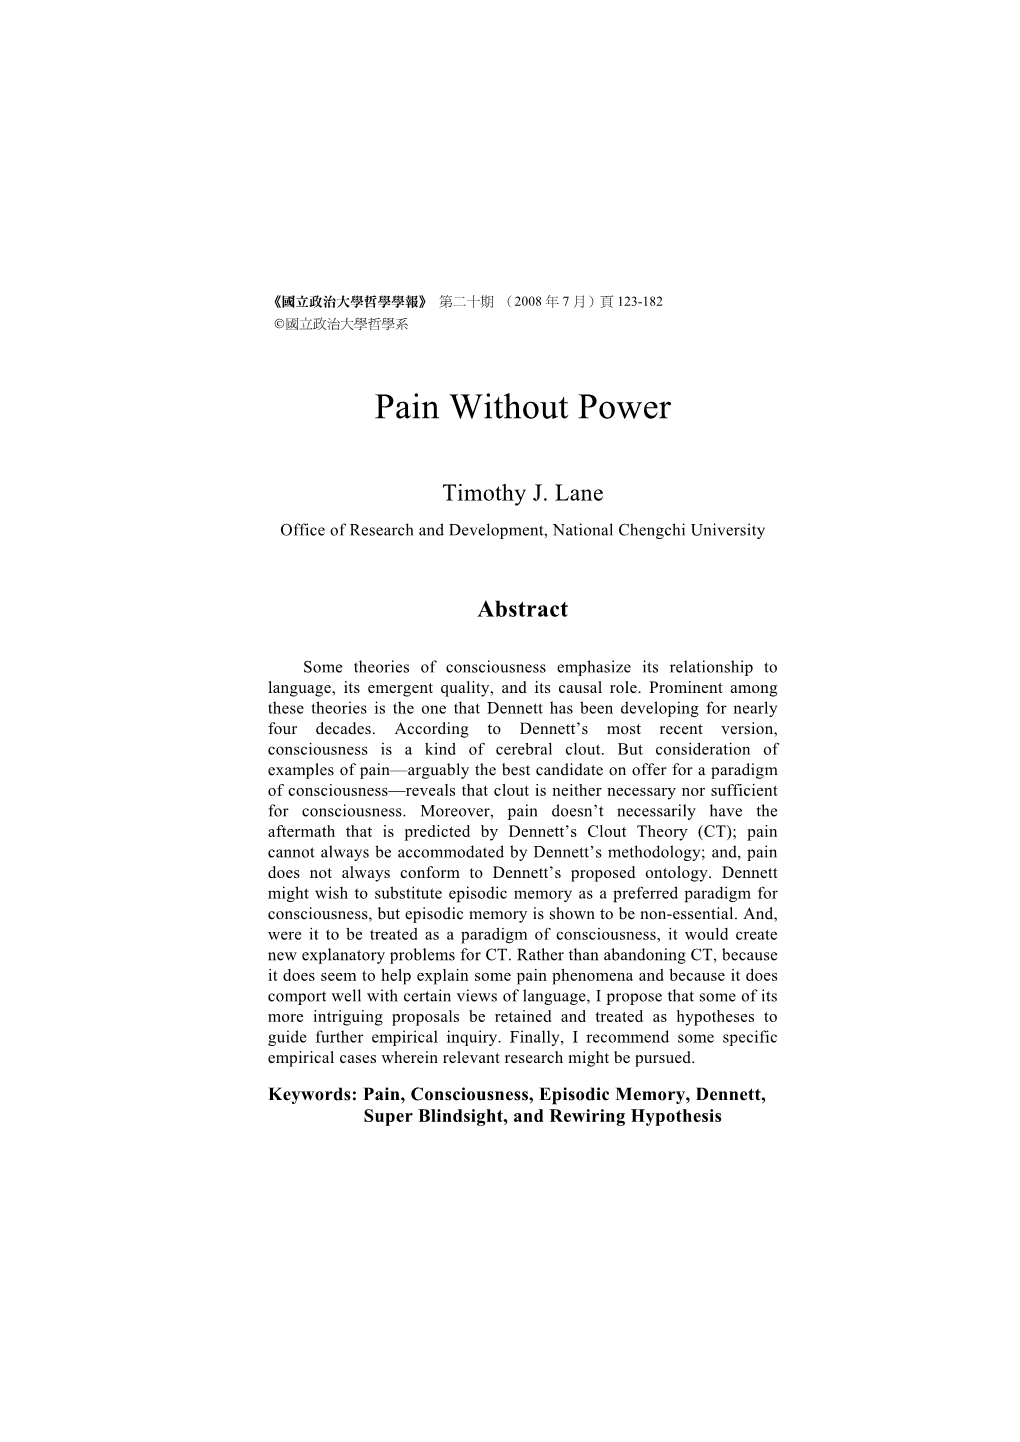 Pain Without Power